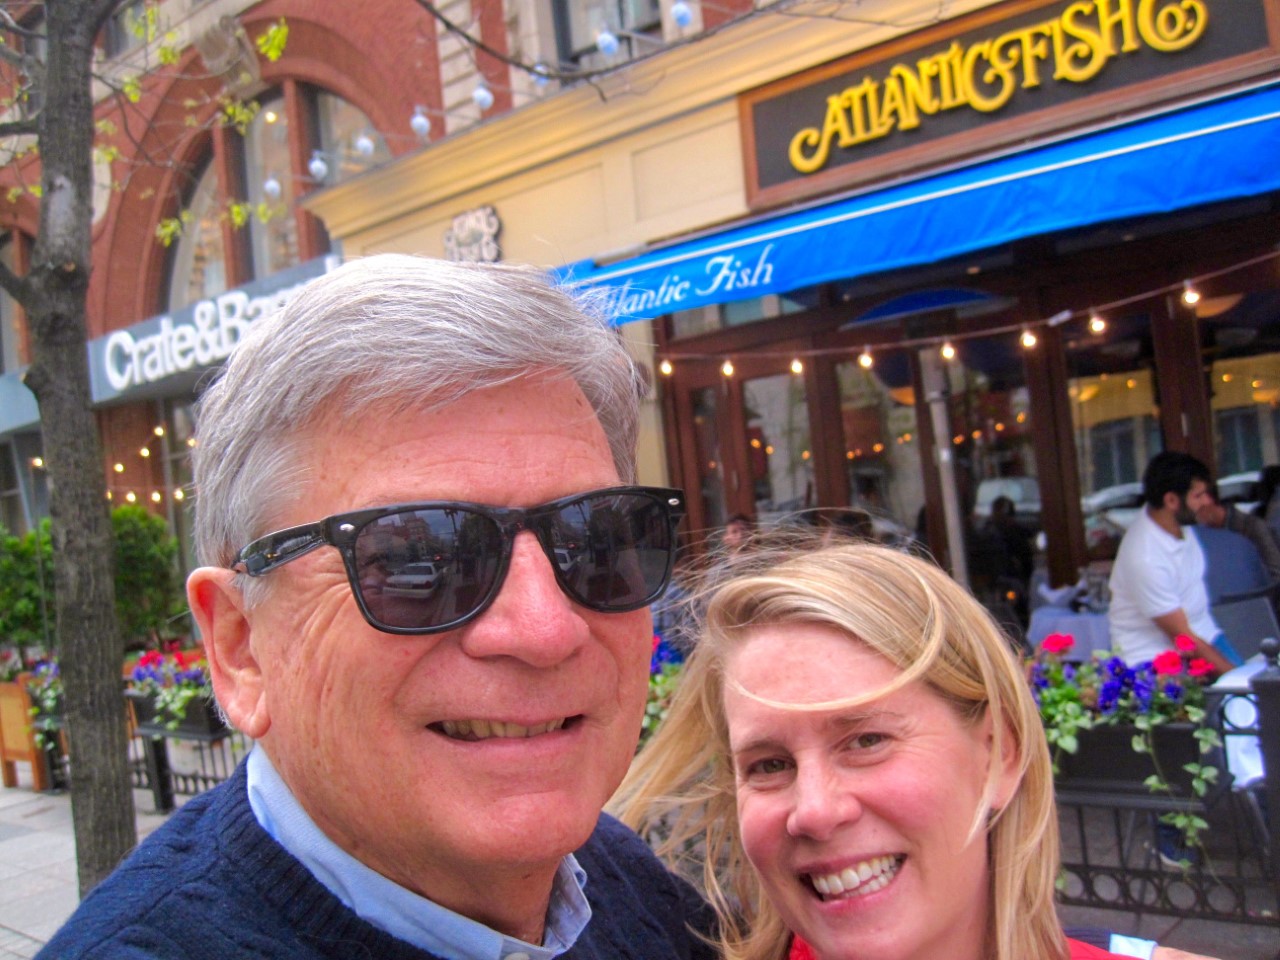 John enjoys sharing time in Boston with his daughter Jennifer who has been an incredible support.